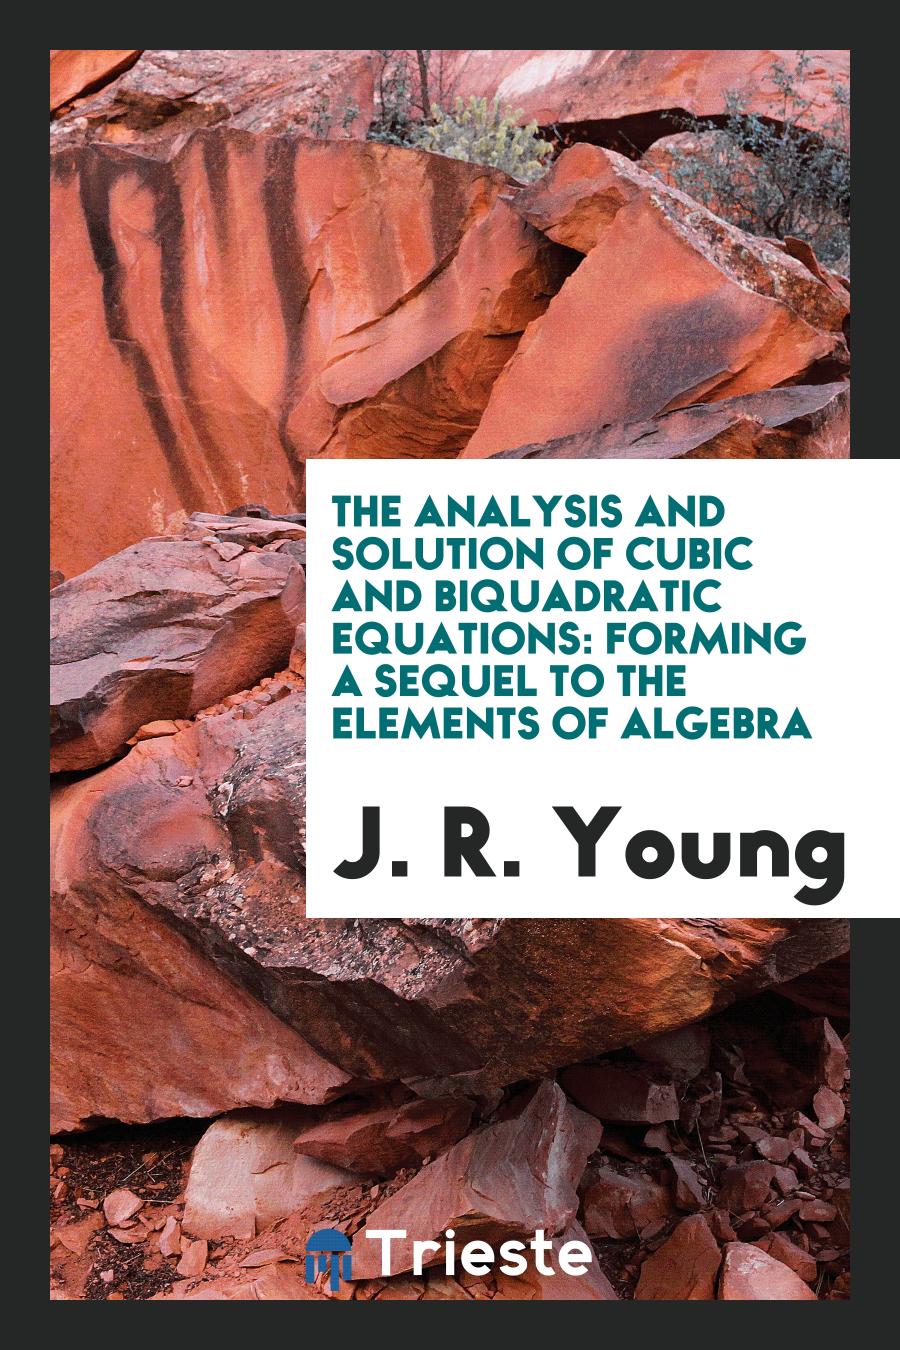 The Analysis and Solution of Cubic and Biquadratic Equations: Forming a Sequel to the Elements of Algebra